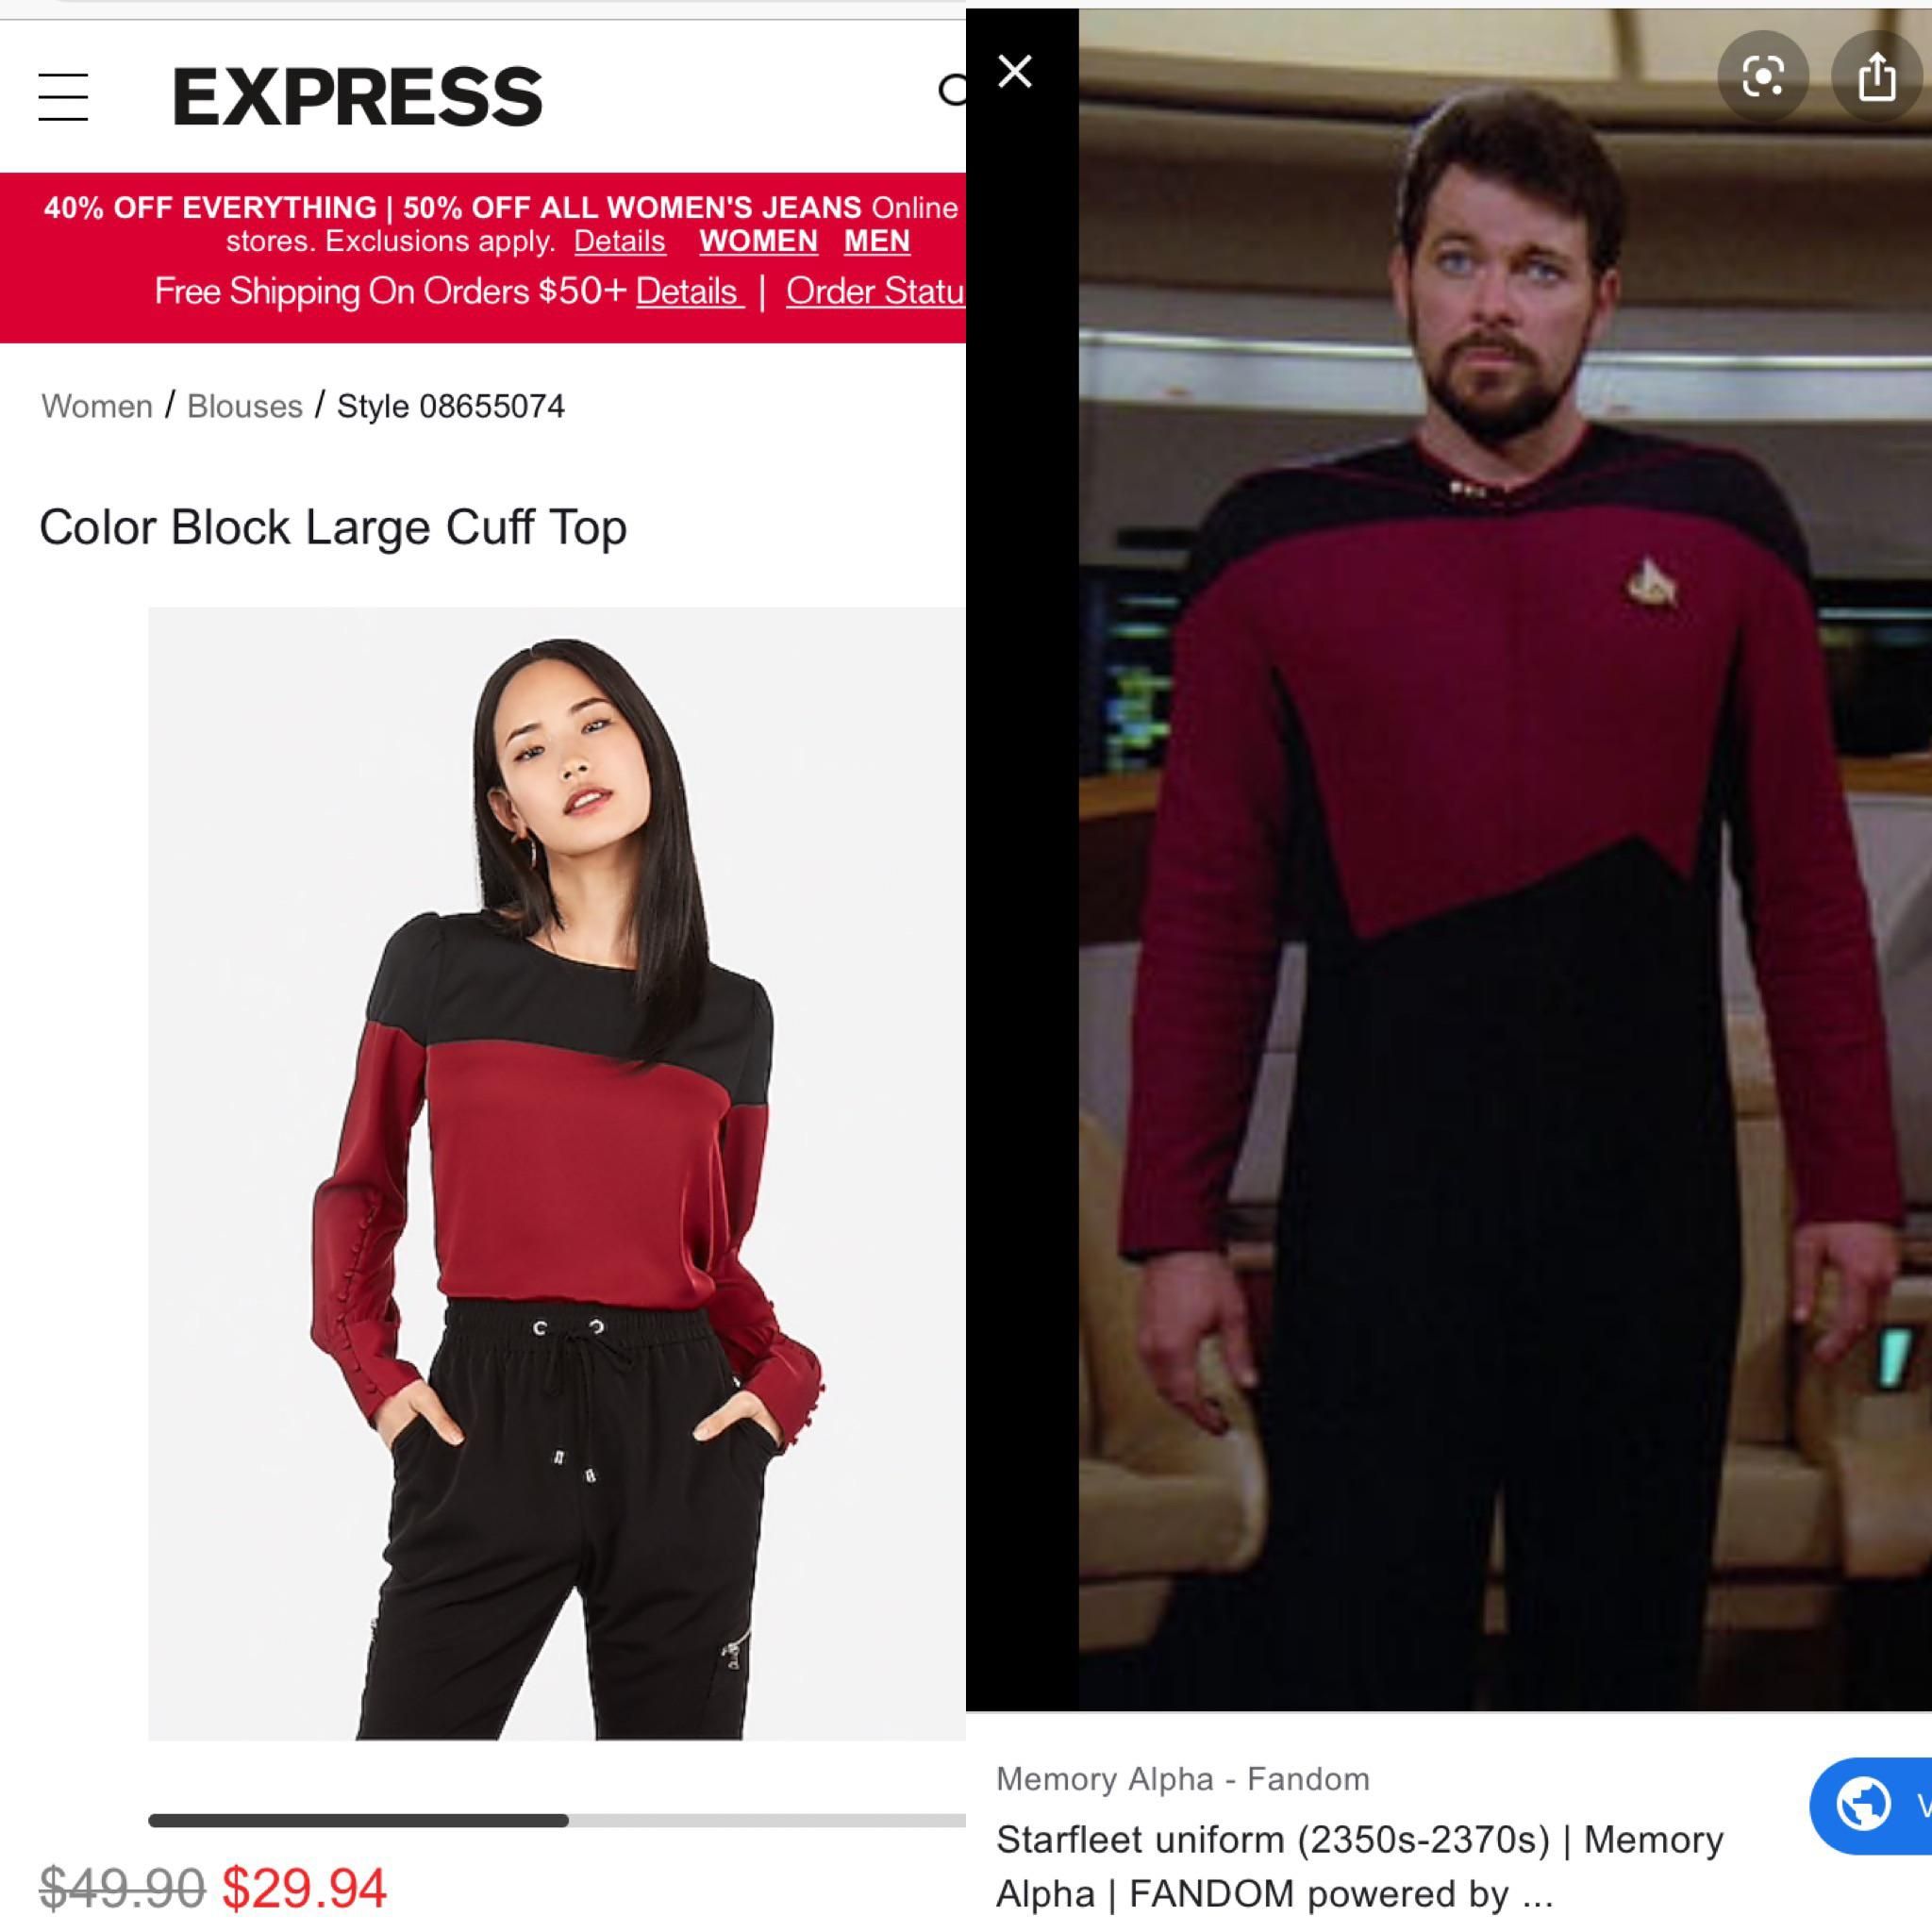 Is it just me, or is Express serving Starfleet realness?